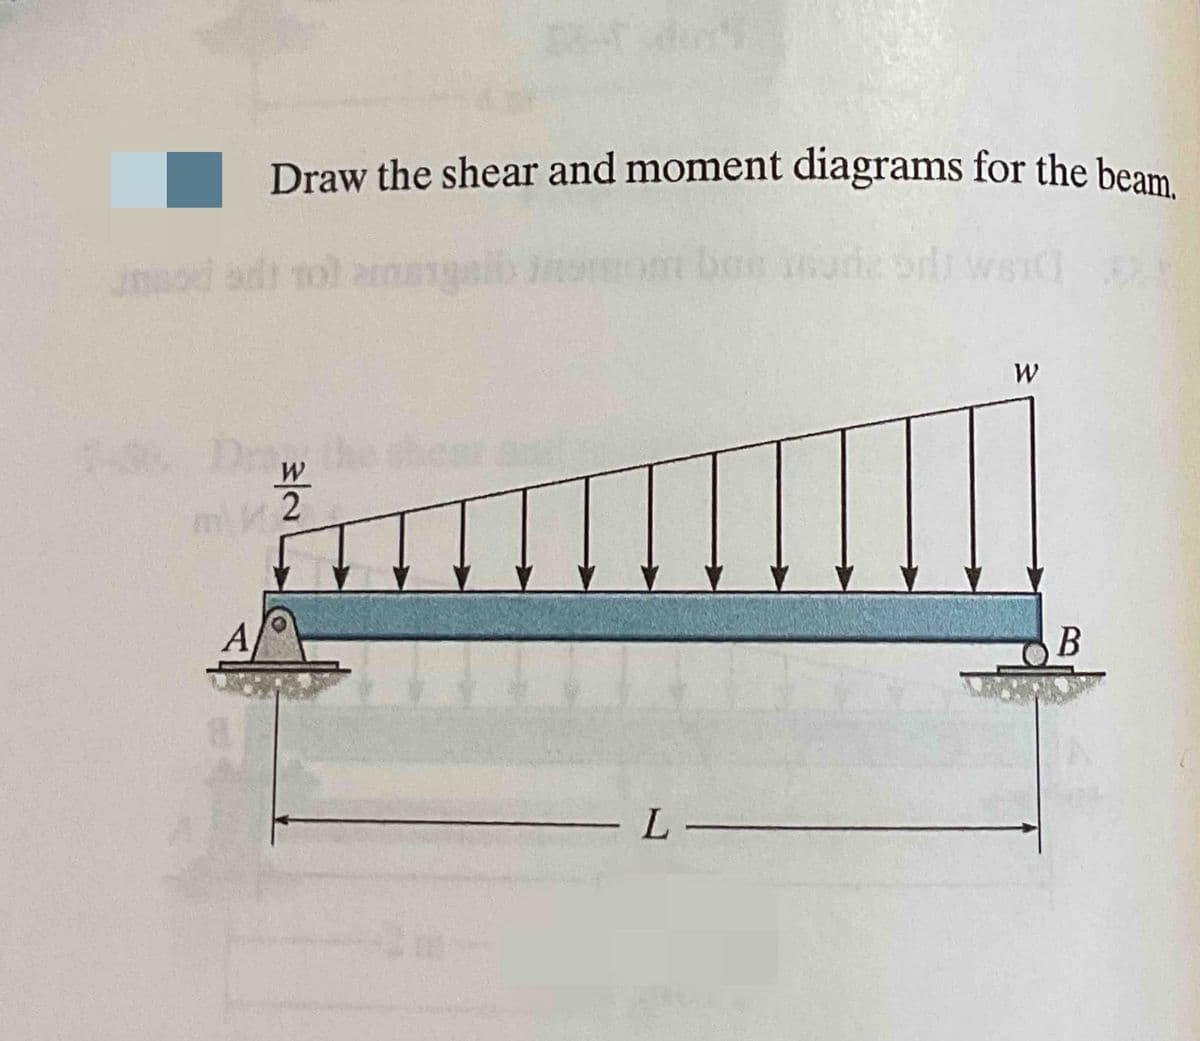 Draw the shear and moment diagrams for the beam.
unsod adt tol amnes
W
m2
A
nga
- L-
W
B